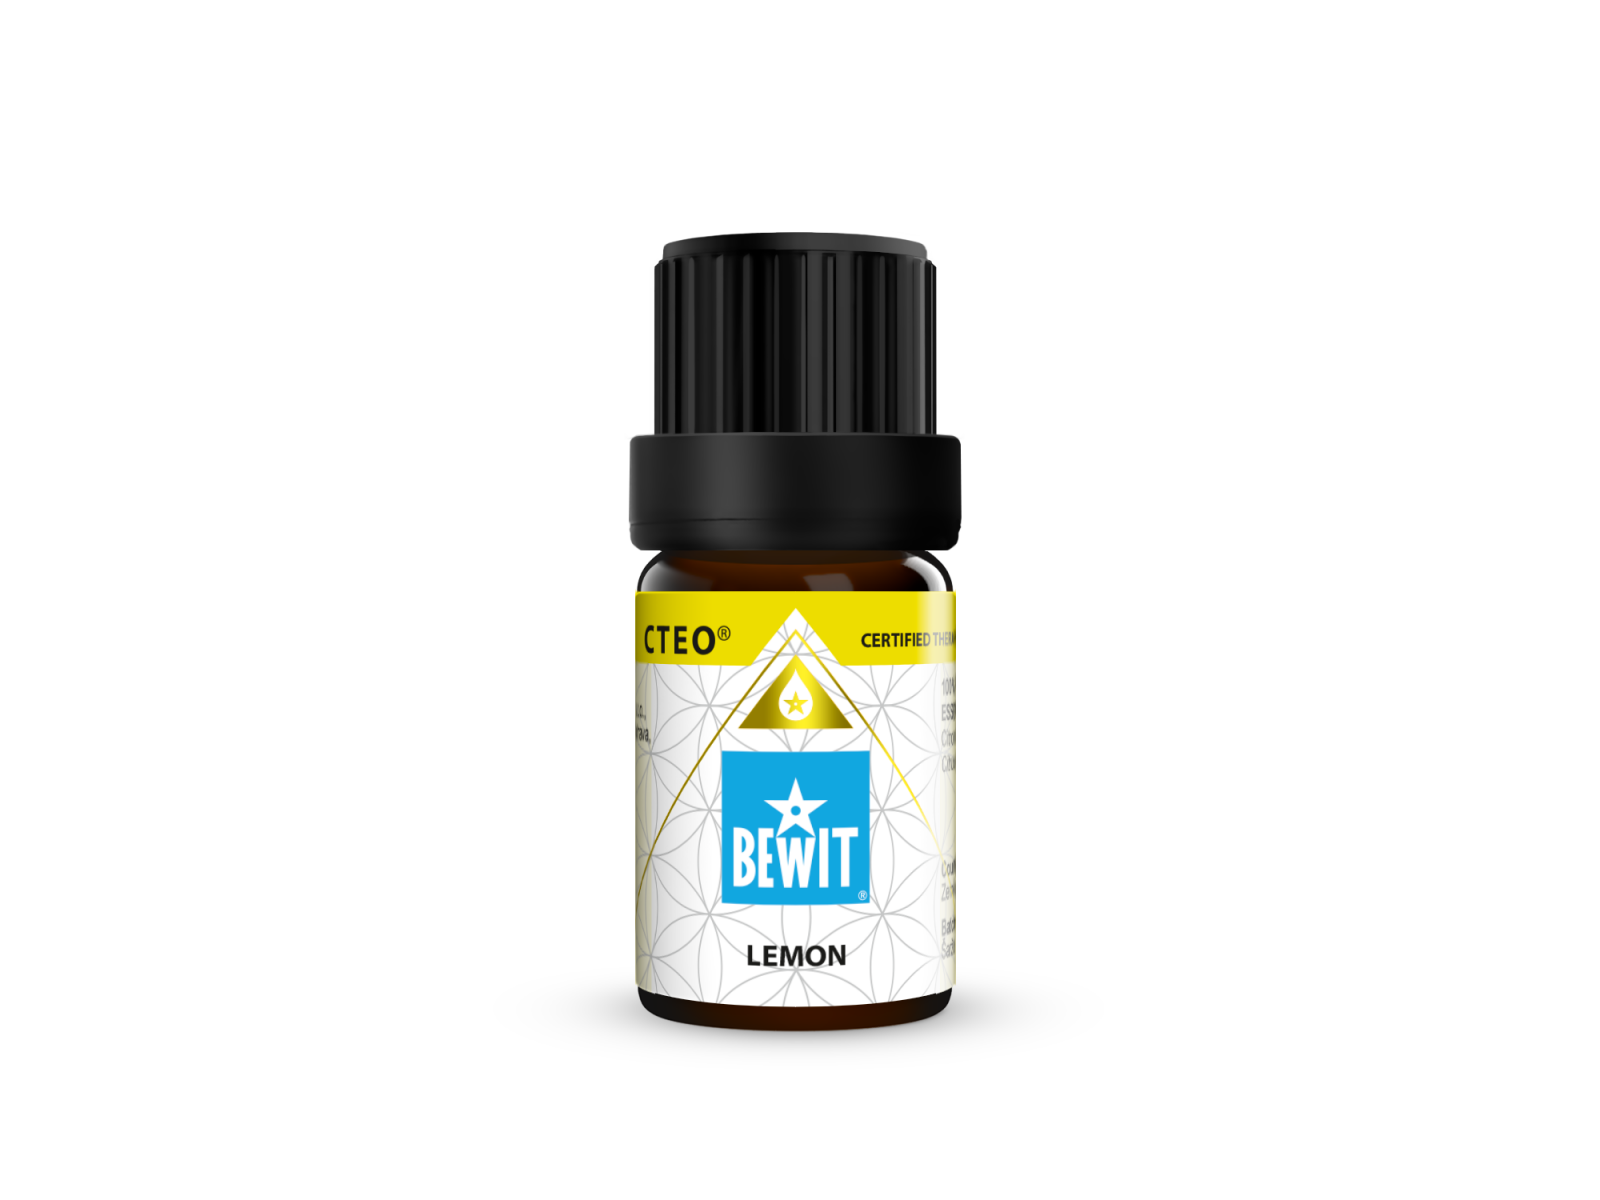 BEWIT Lemon - 100% pure and natural CTEO® essential oil - 4